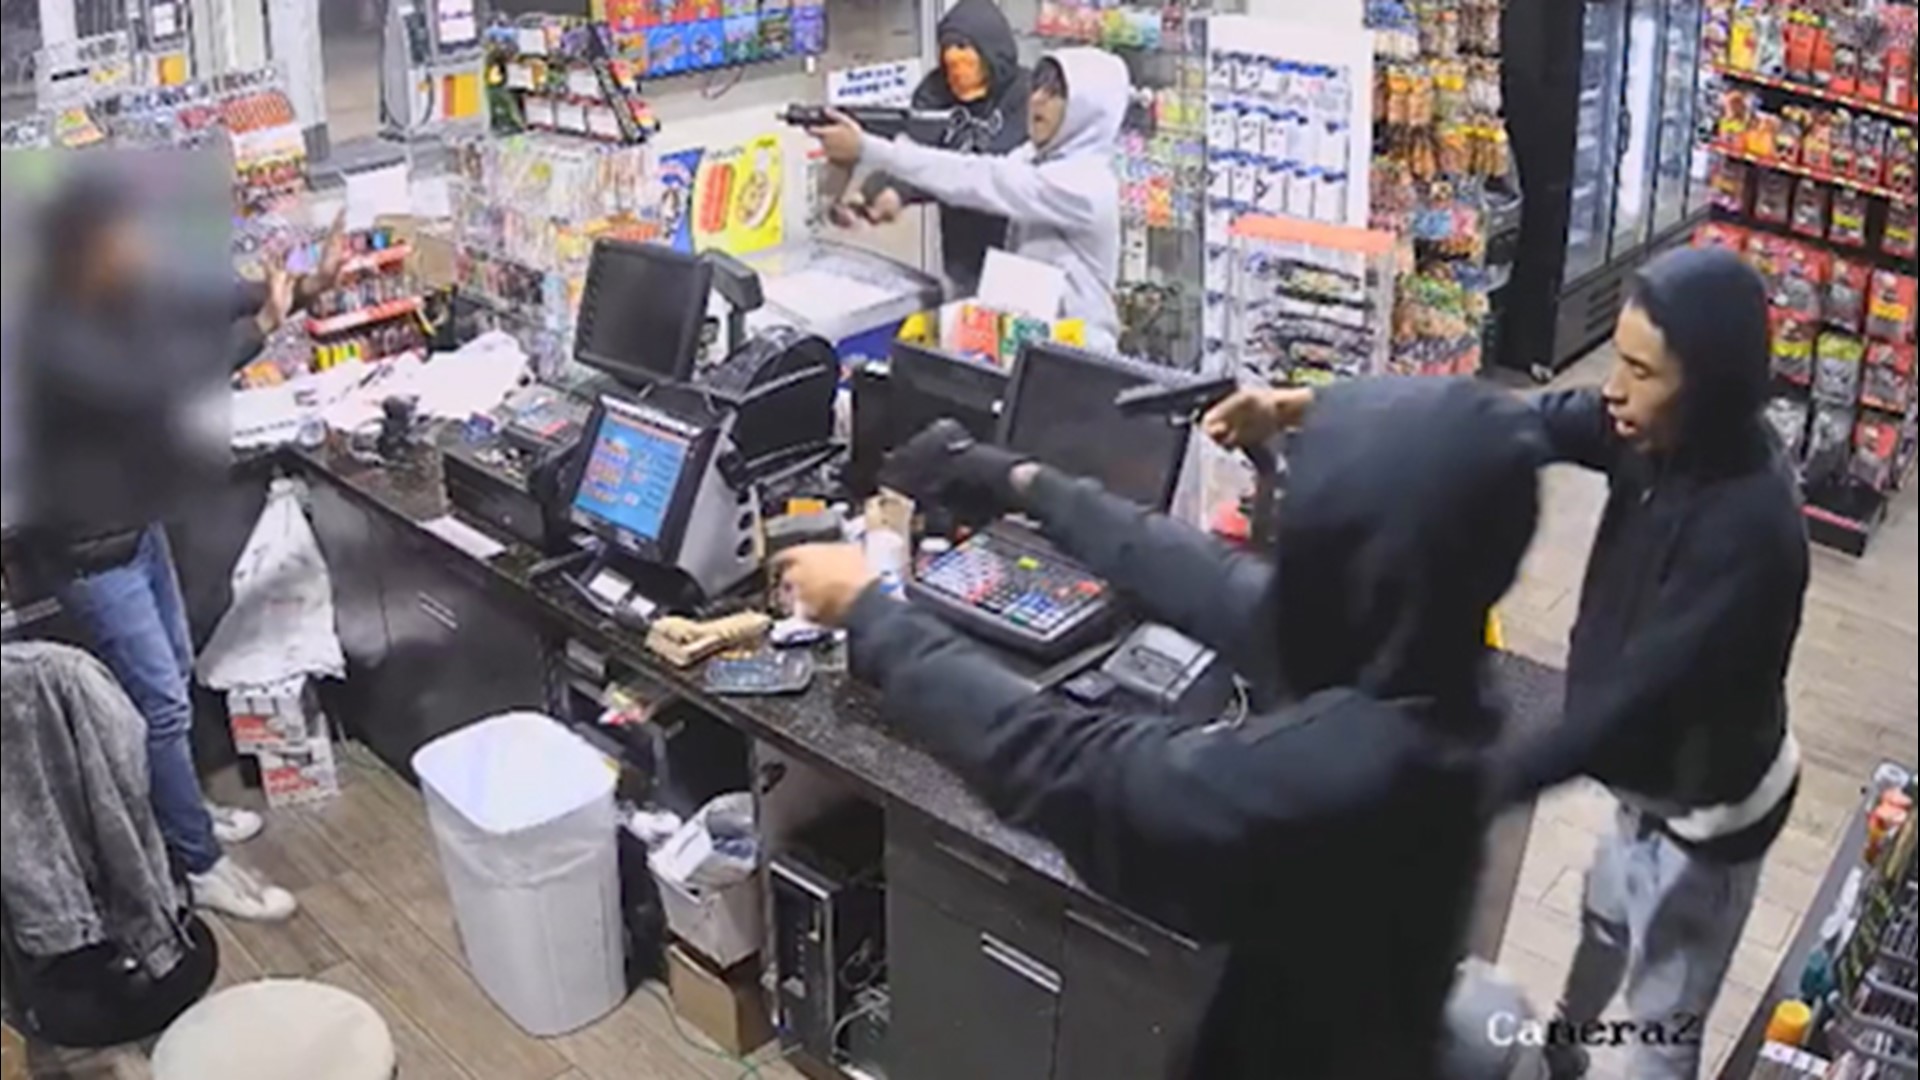 The four suspects all pulled out their guns when they walked into the store on May 17.